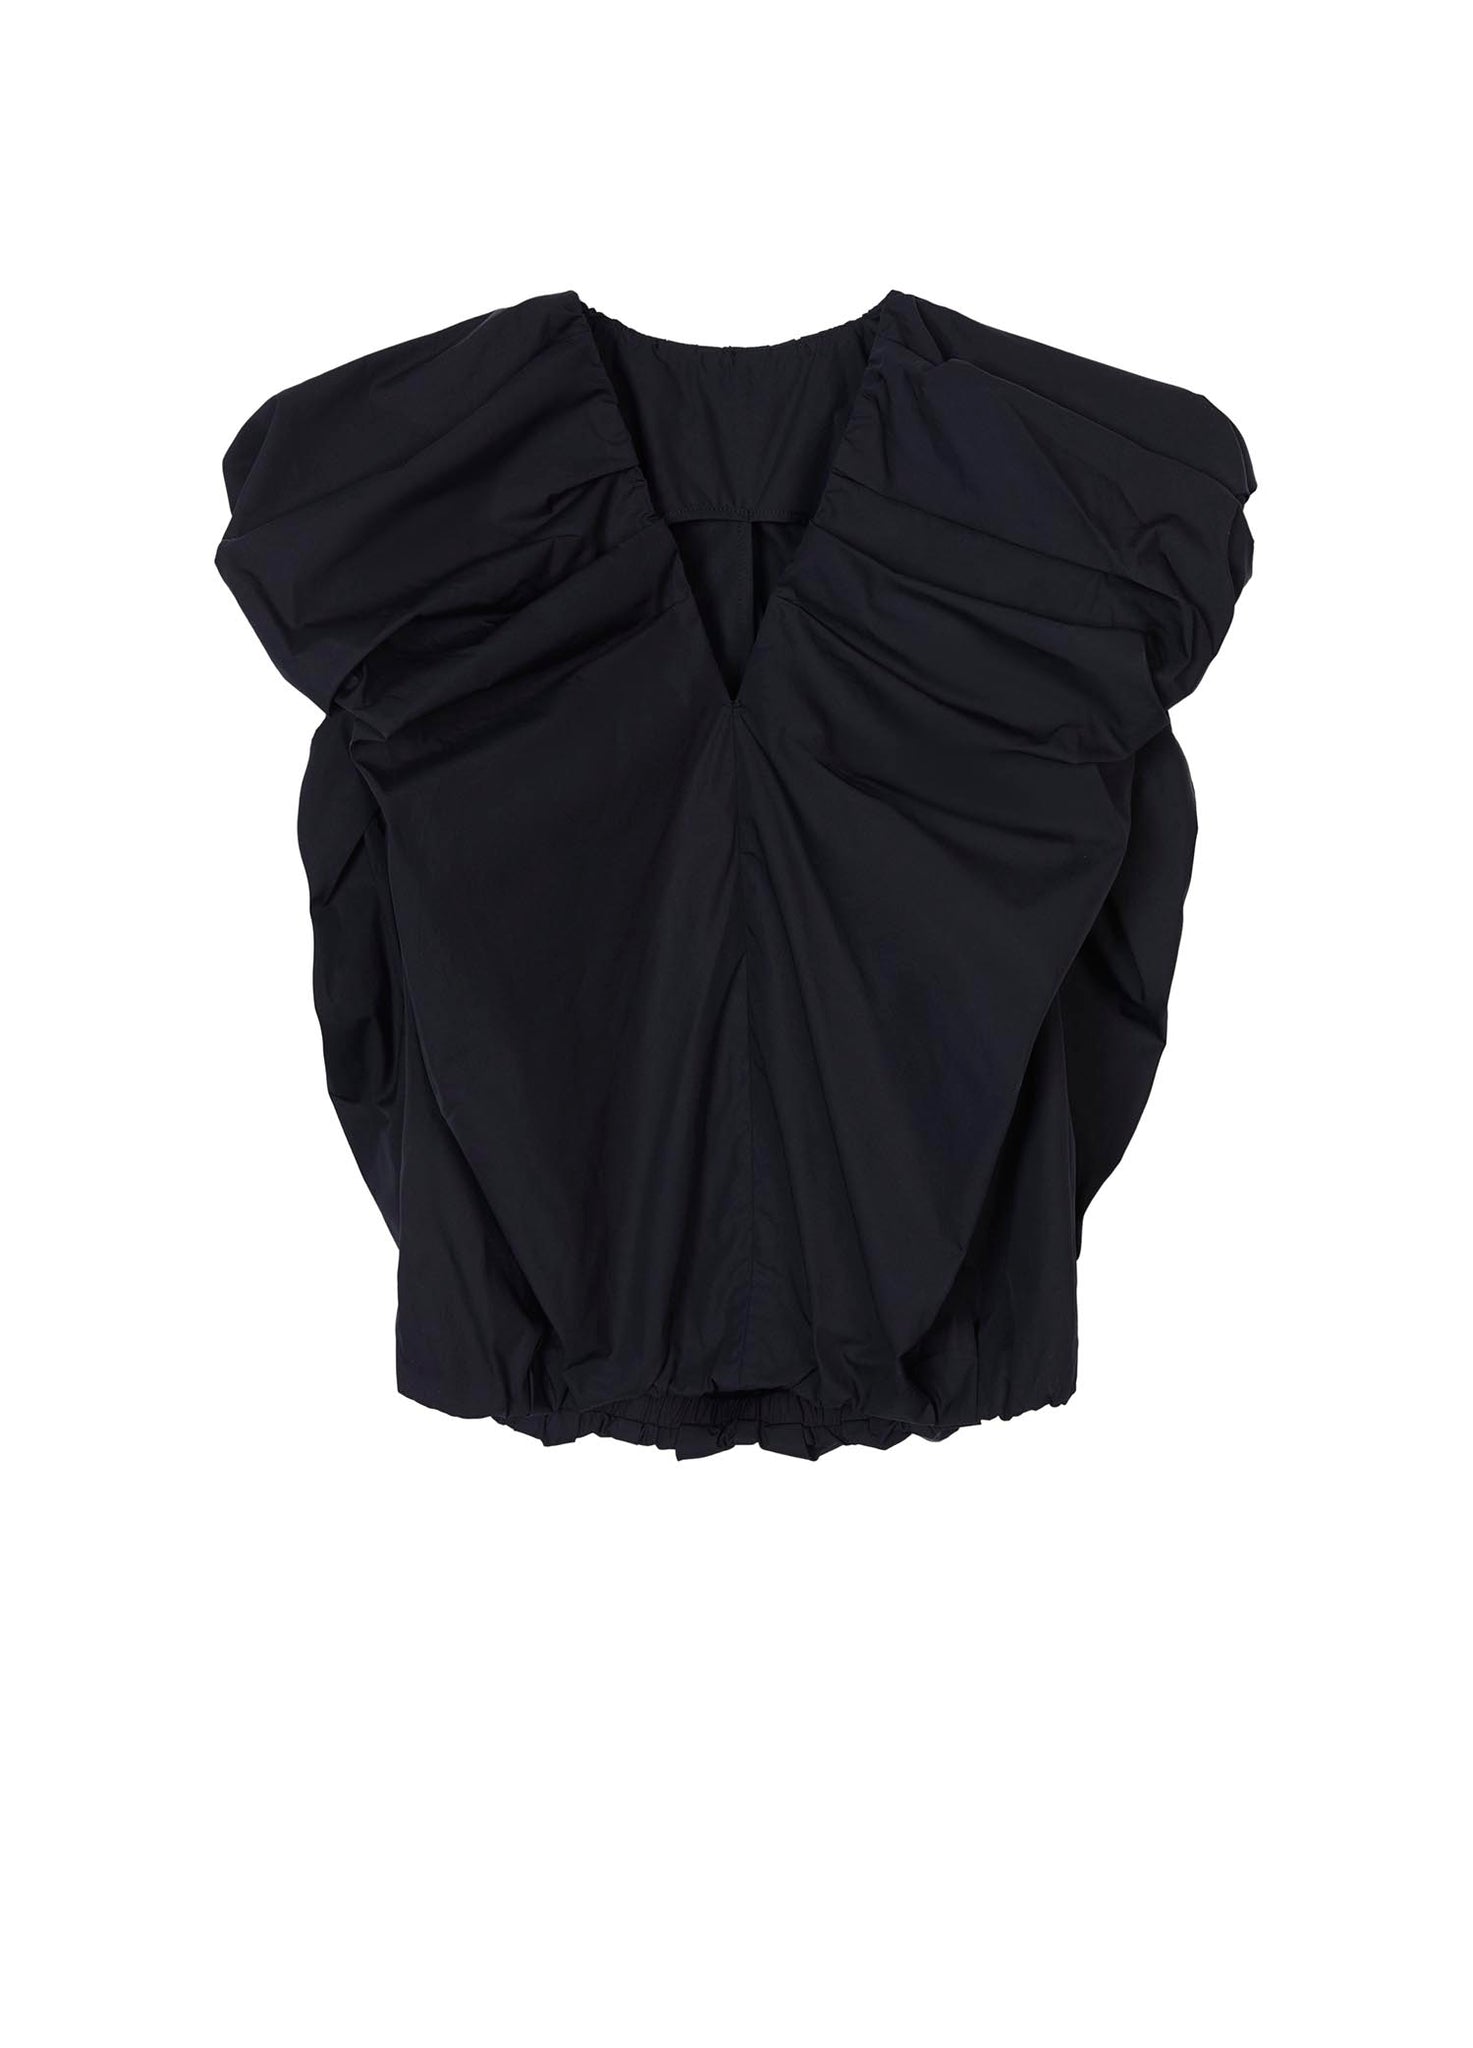 Shirt / JNBY Loose Fit V-Neck Ruffled Sleeveless Top (100% Cotton)